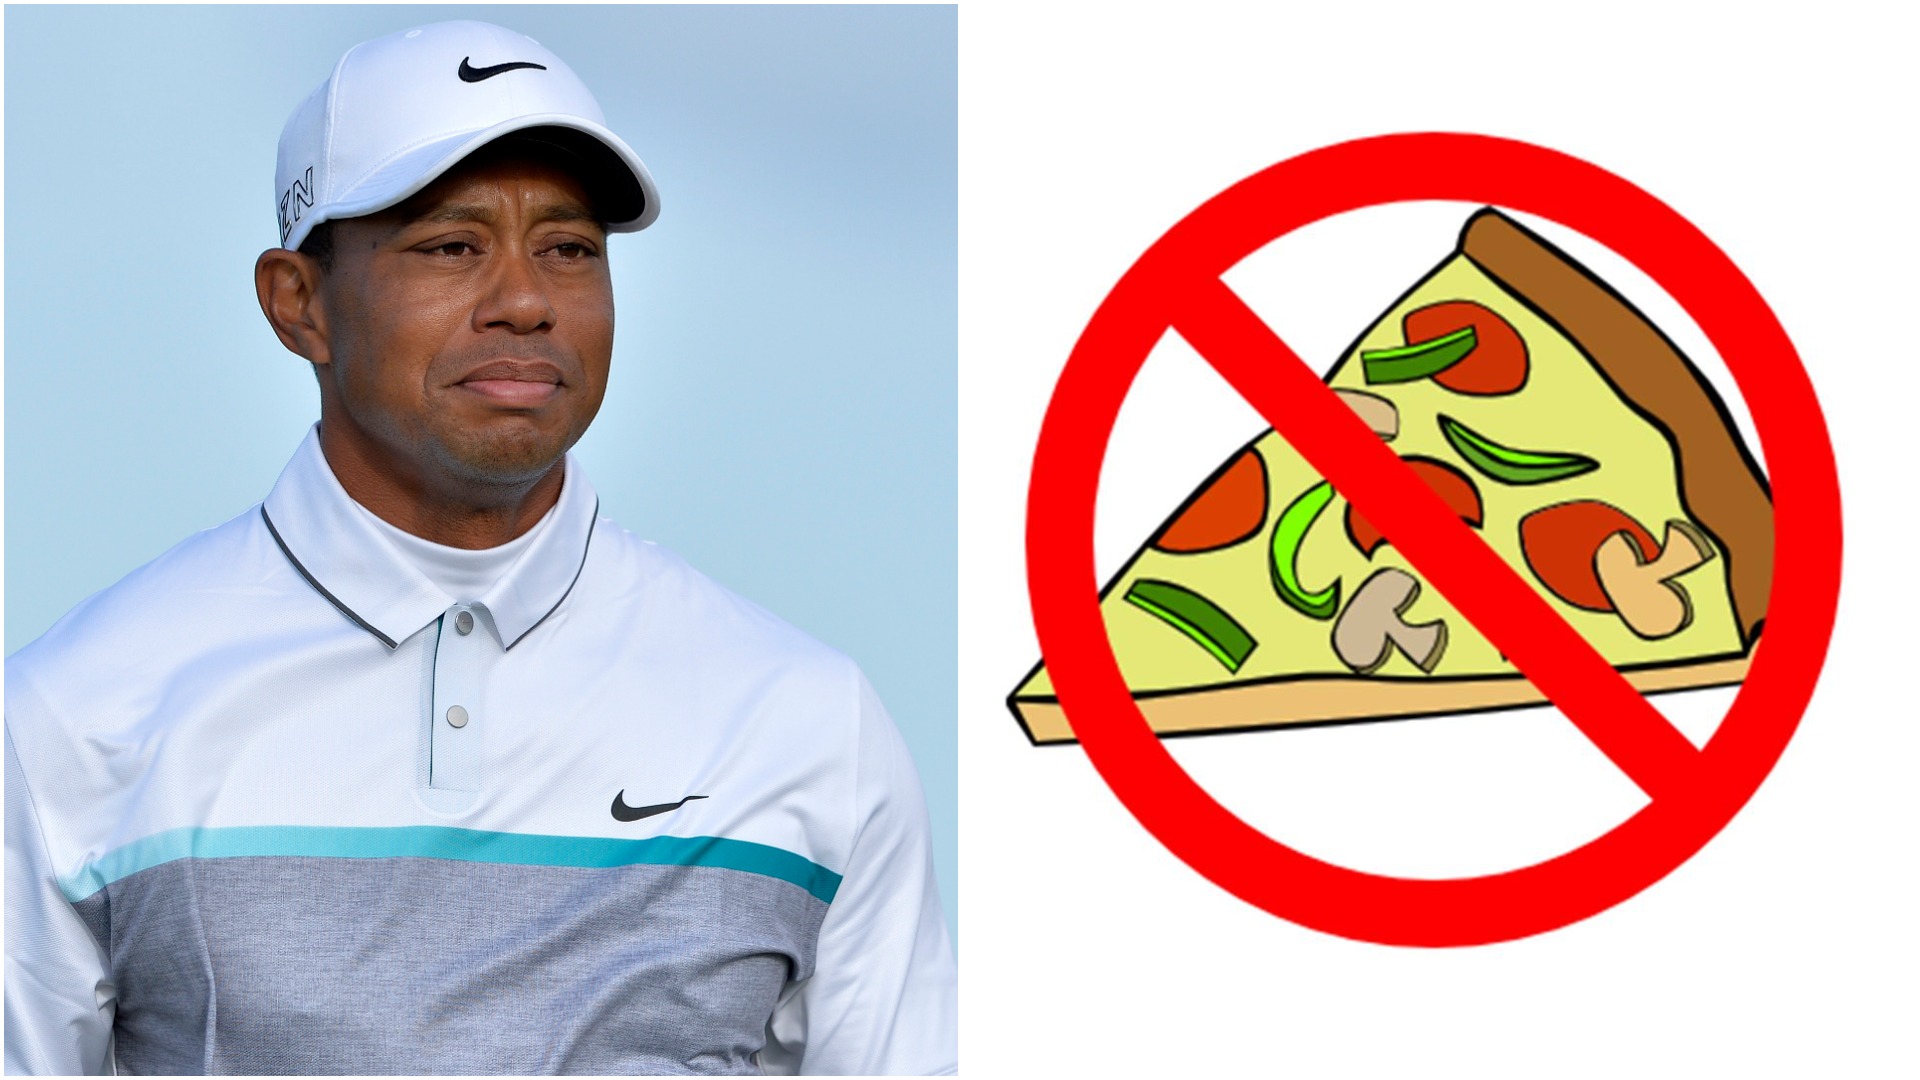 WATCH: Tiger Woods gets denied PIZZA during Pro-Am; this is HILARIOUS!